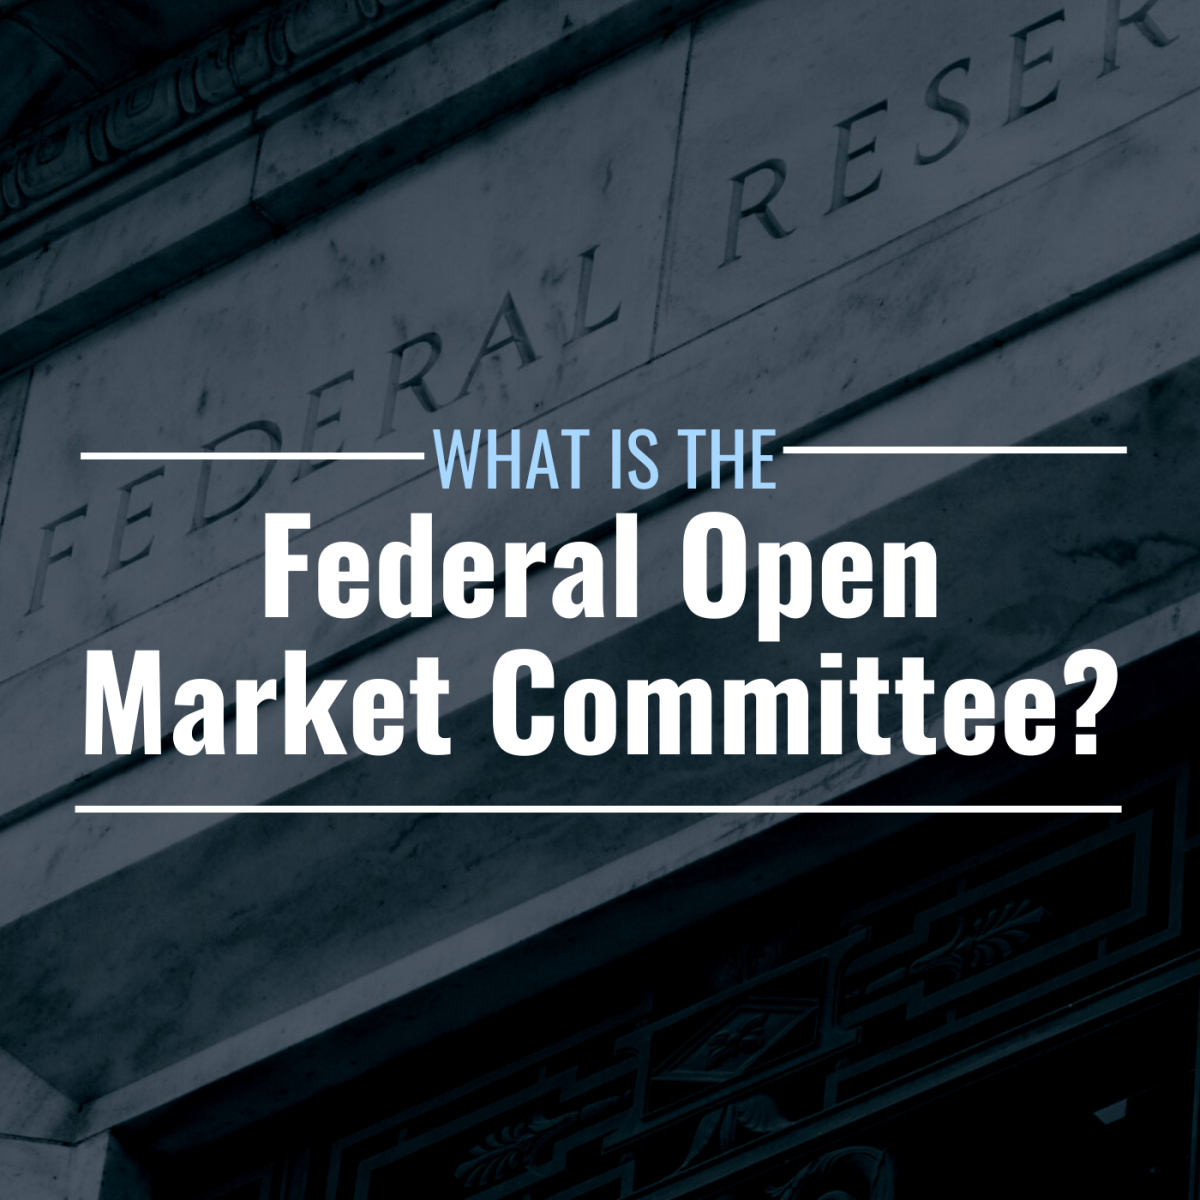 Facade of the Federal Reserve with text overlay: "What Is the Federal Open Market Committee?"